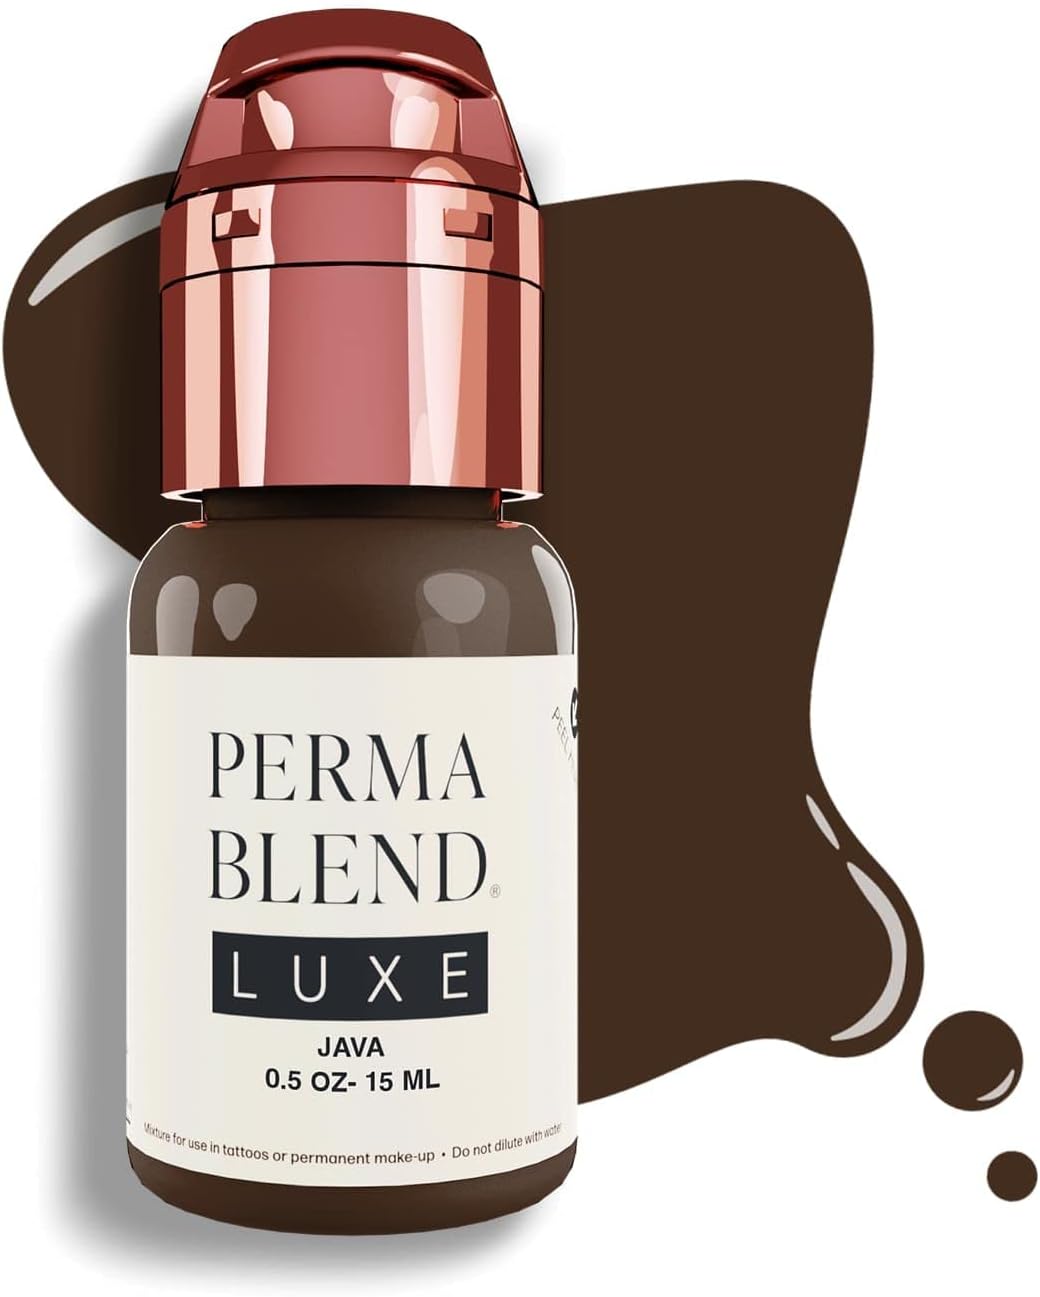 perma blend luxe java microblading ink review